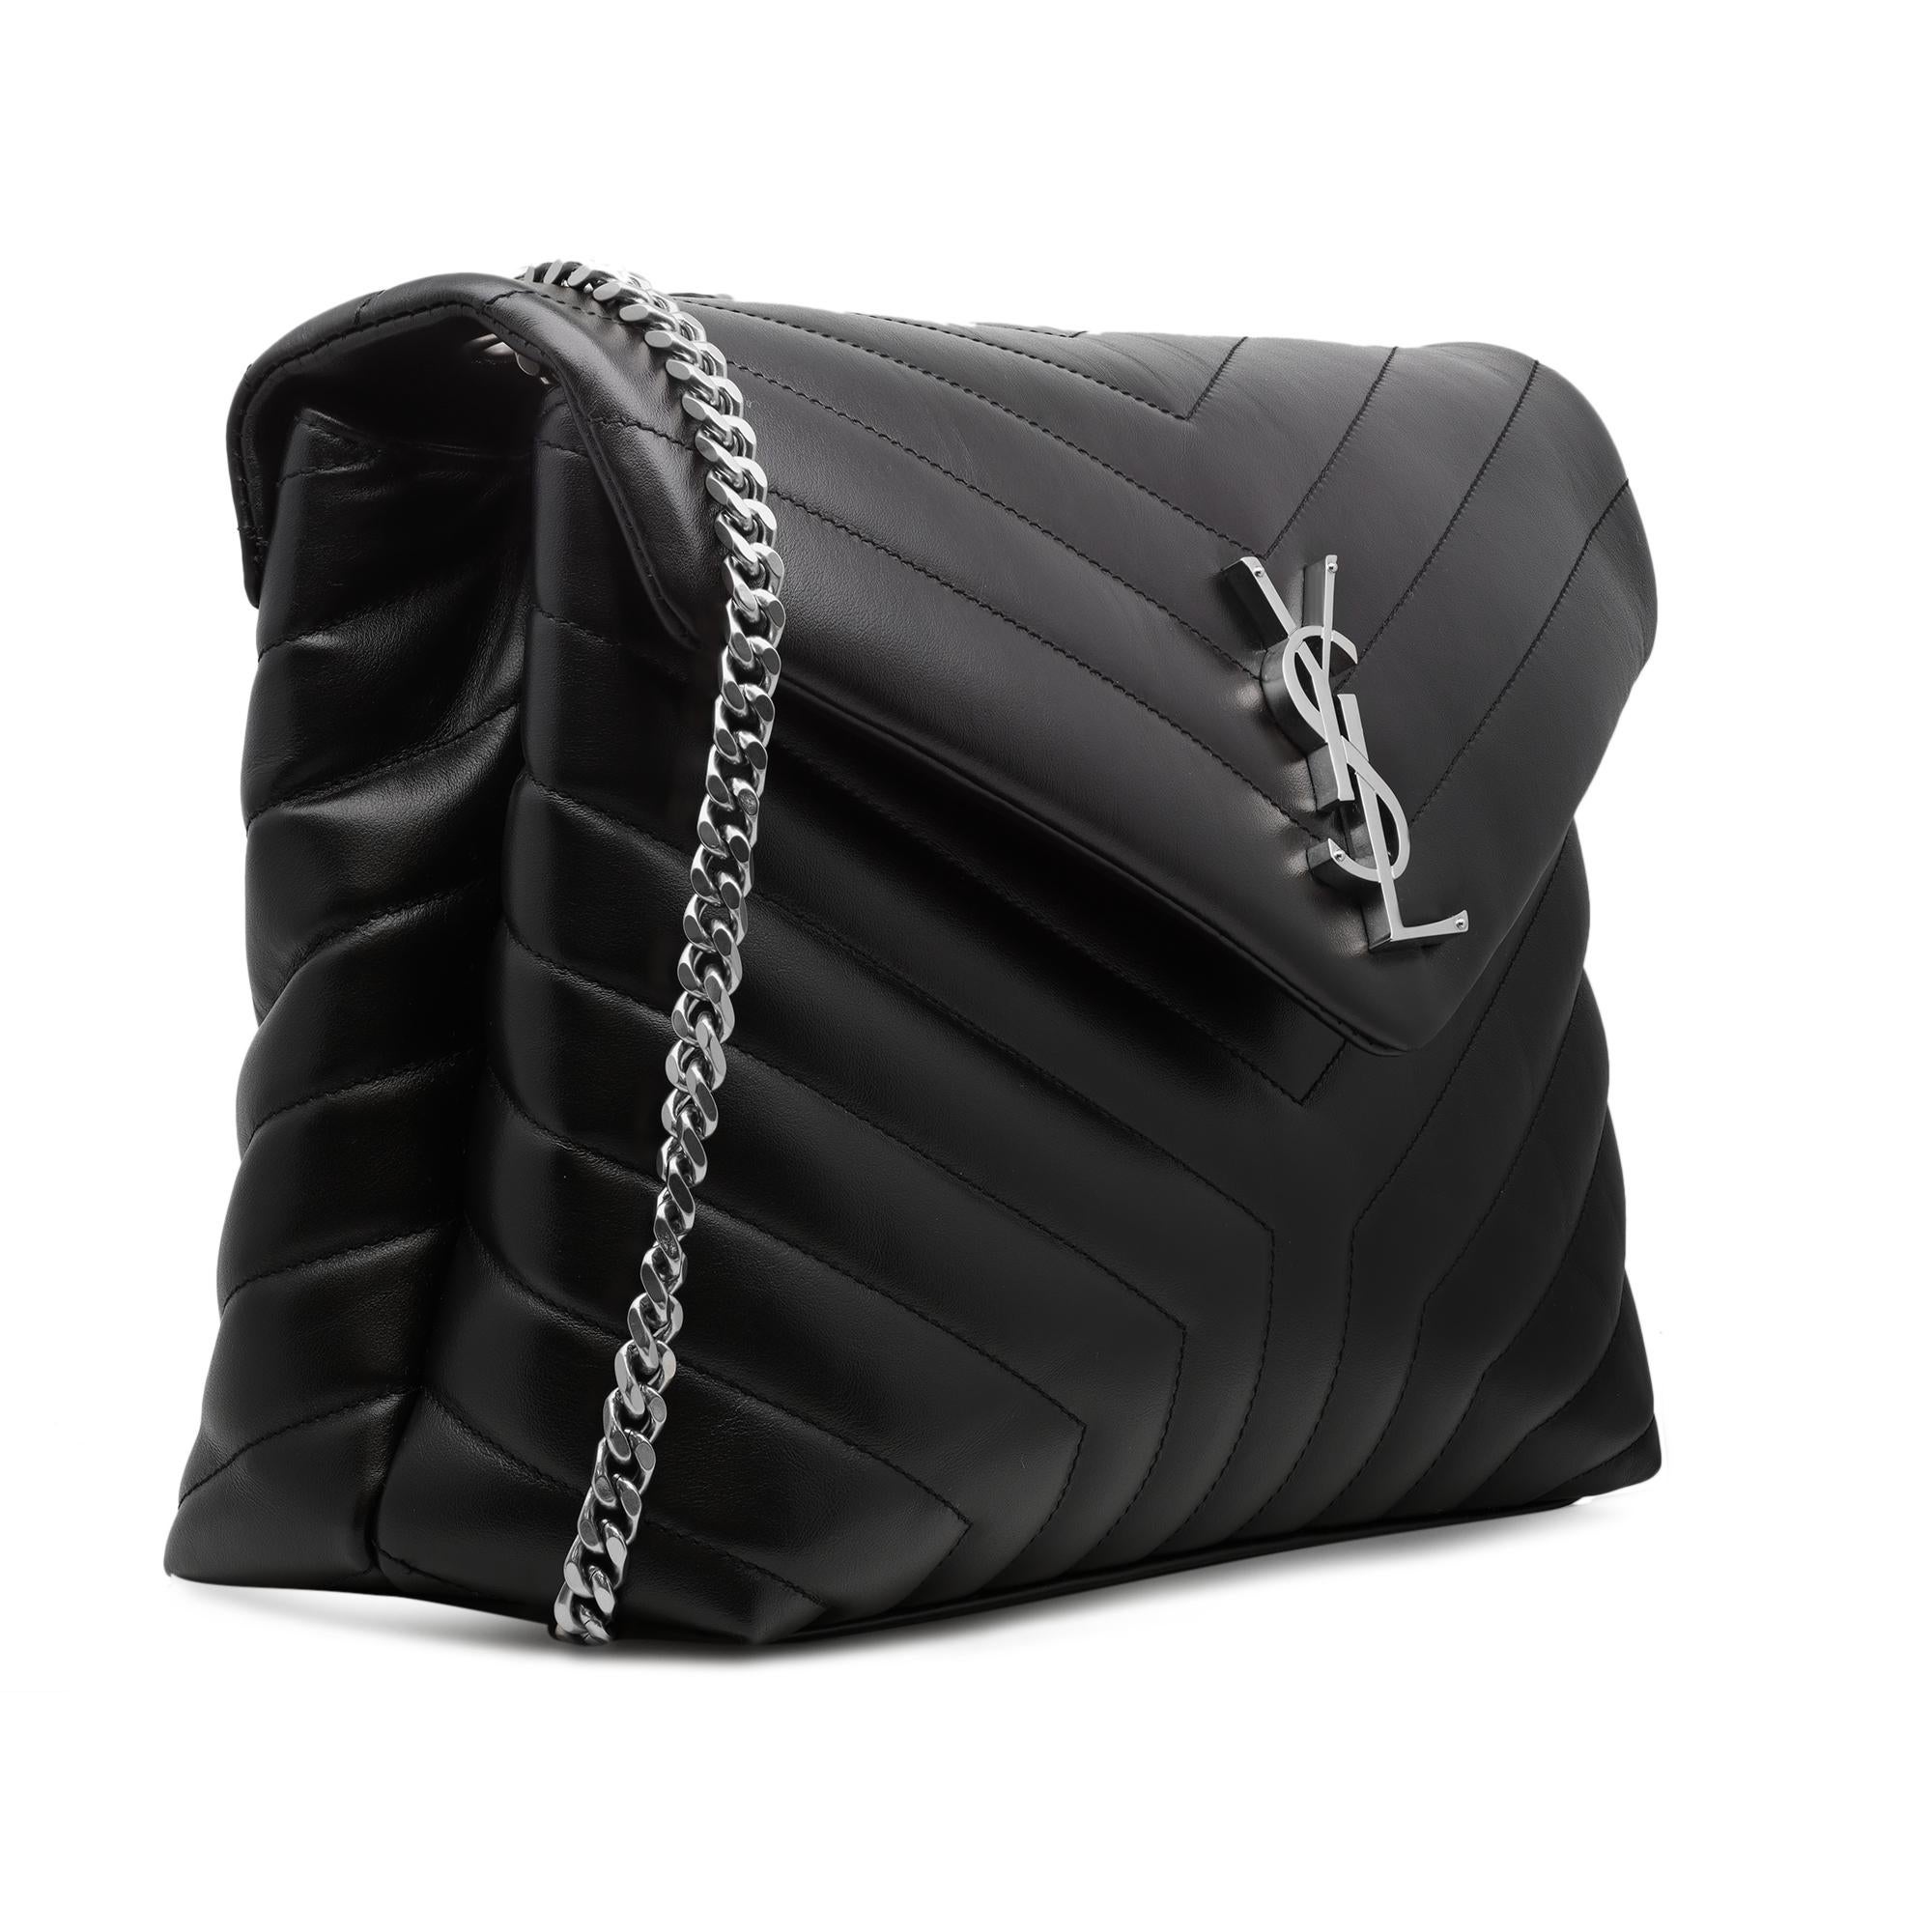 ysl black and silver bag